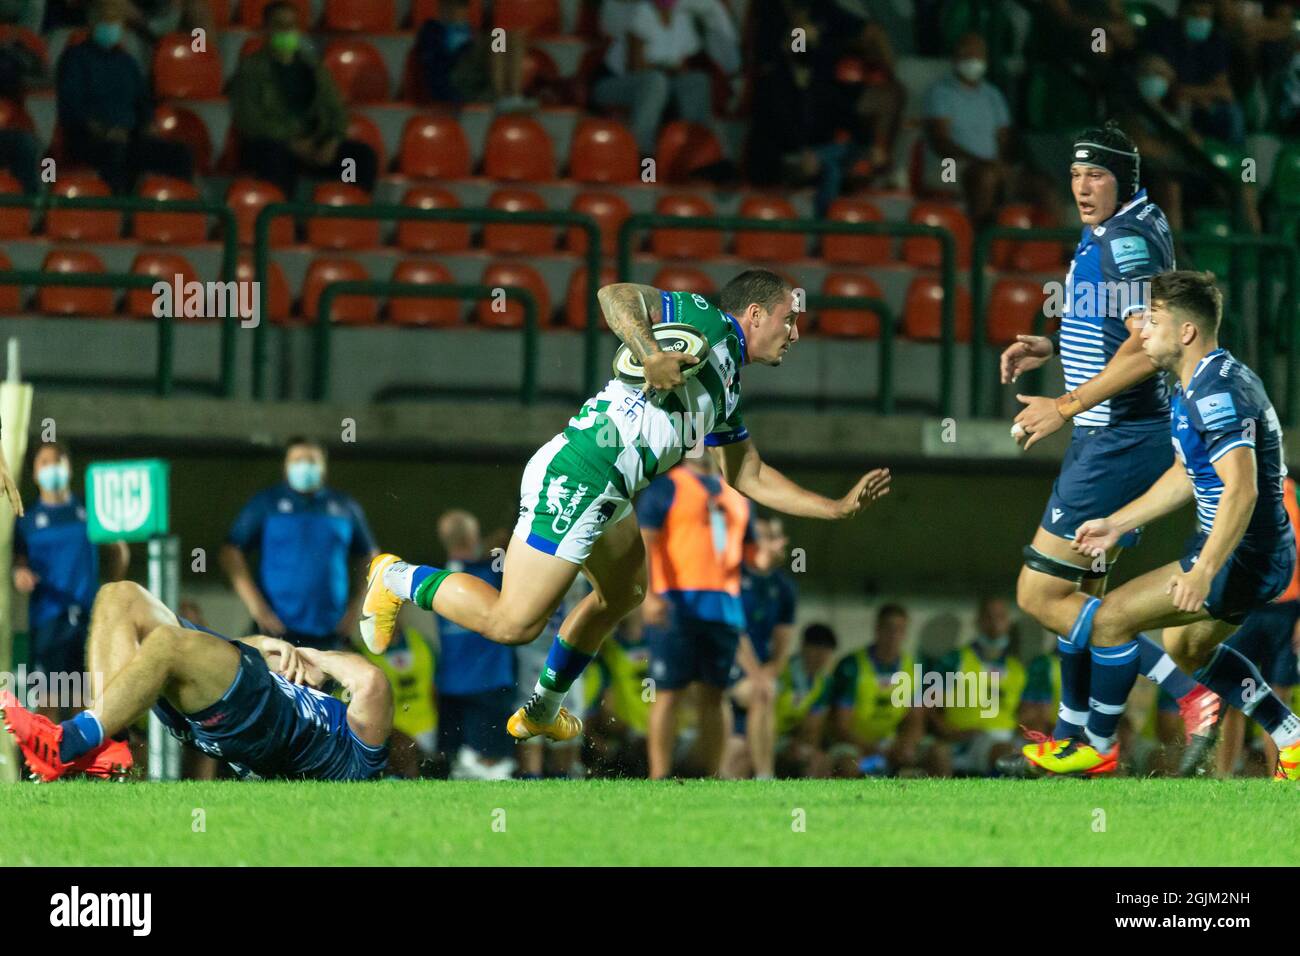 Treviso, Italy. 10th Sep, 2021. Benetton Treviso vs Sale Sharks, Other in  Treviso, Italy, September 10 2021 Credit: Independent Photo Agency/Alamy  Live News Stock Photo - Alamy